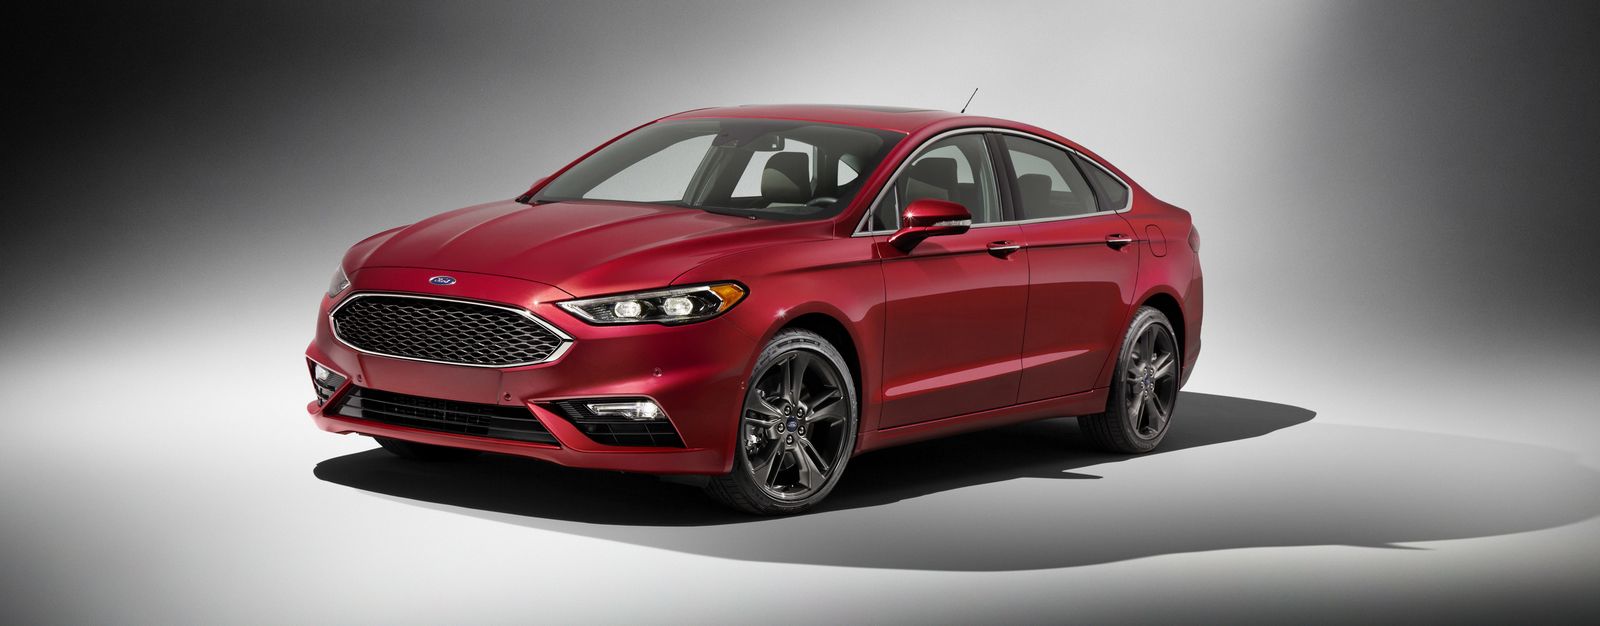 2019 Ford Fusion 2